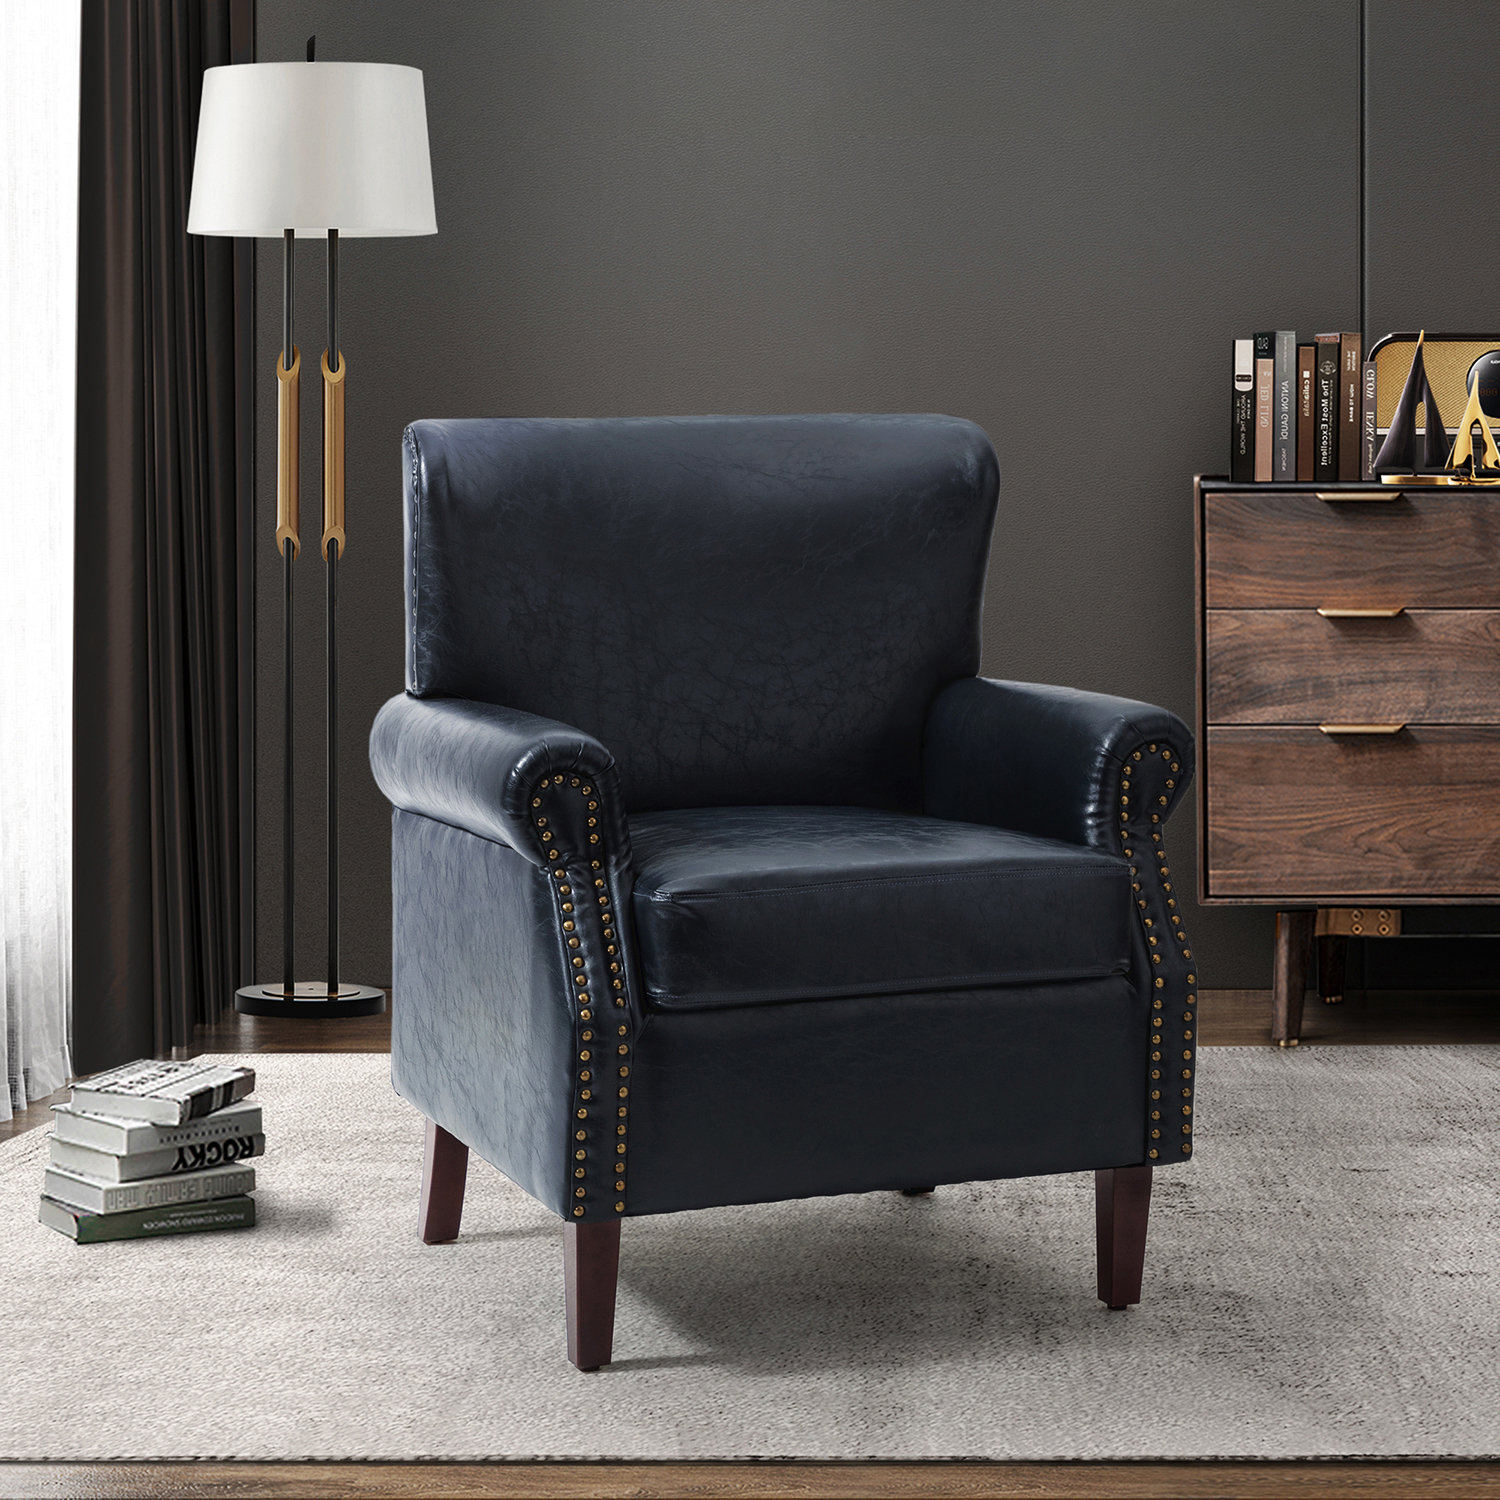 Cover Armchair  Make a statement with a sophisticated chair